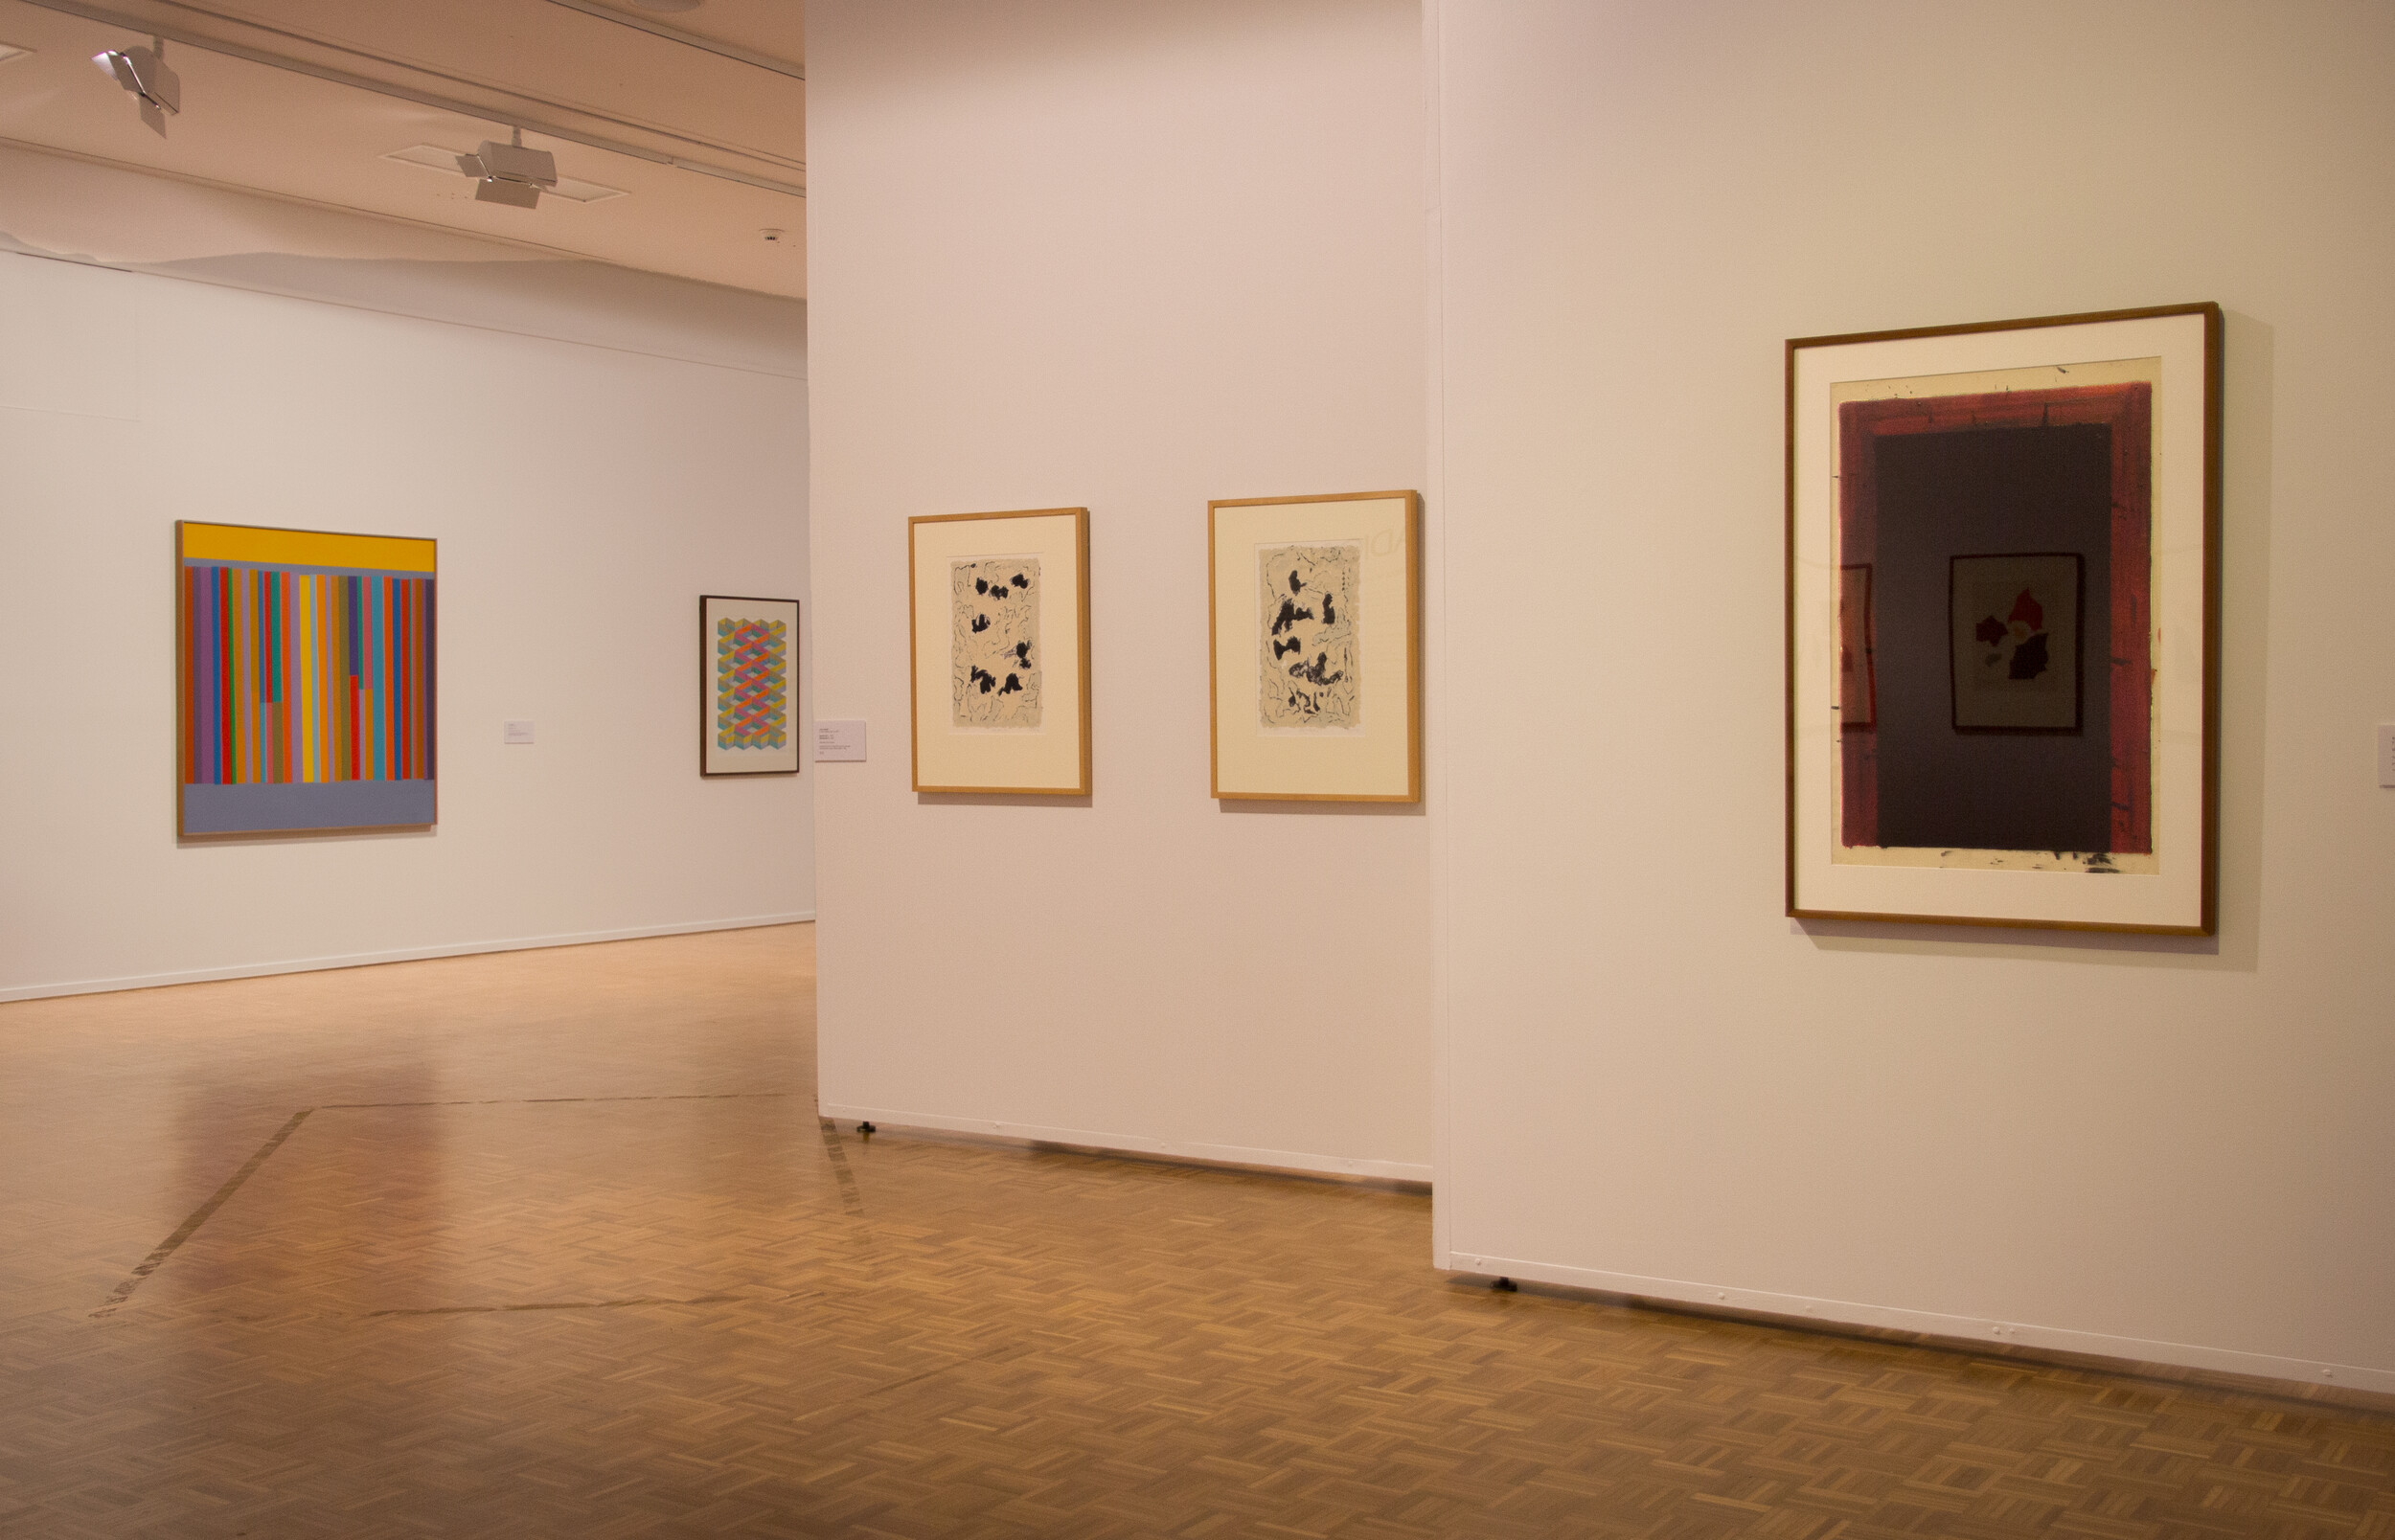 Installation view of <em>Stockade 1</em> (1974) by Cecil Hardy, <em>Blackheath I and II</em> (1979) by John Peart, and Untitled (1971) by Peter Booth in Radical: Australian Abstract Art of the 70s and 80s, Warrnambool Art Gallery.